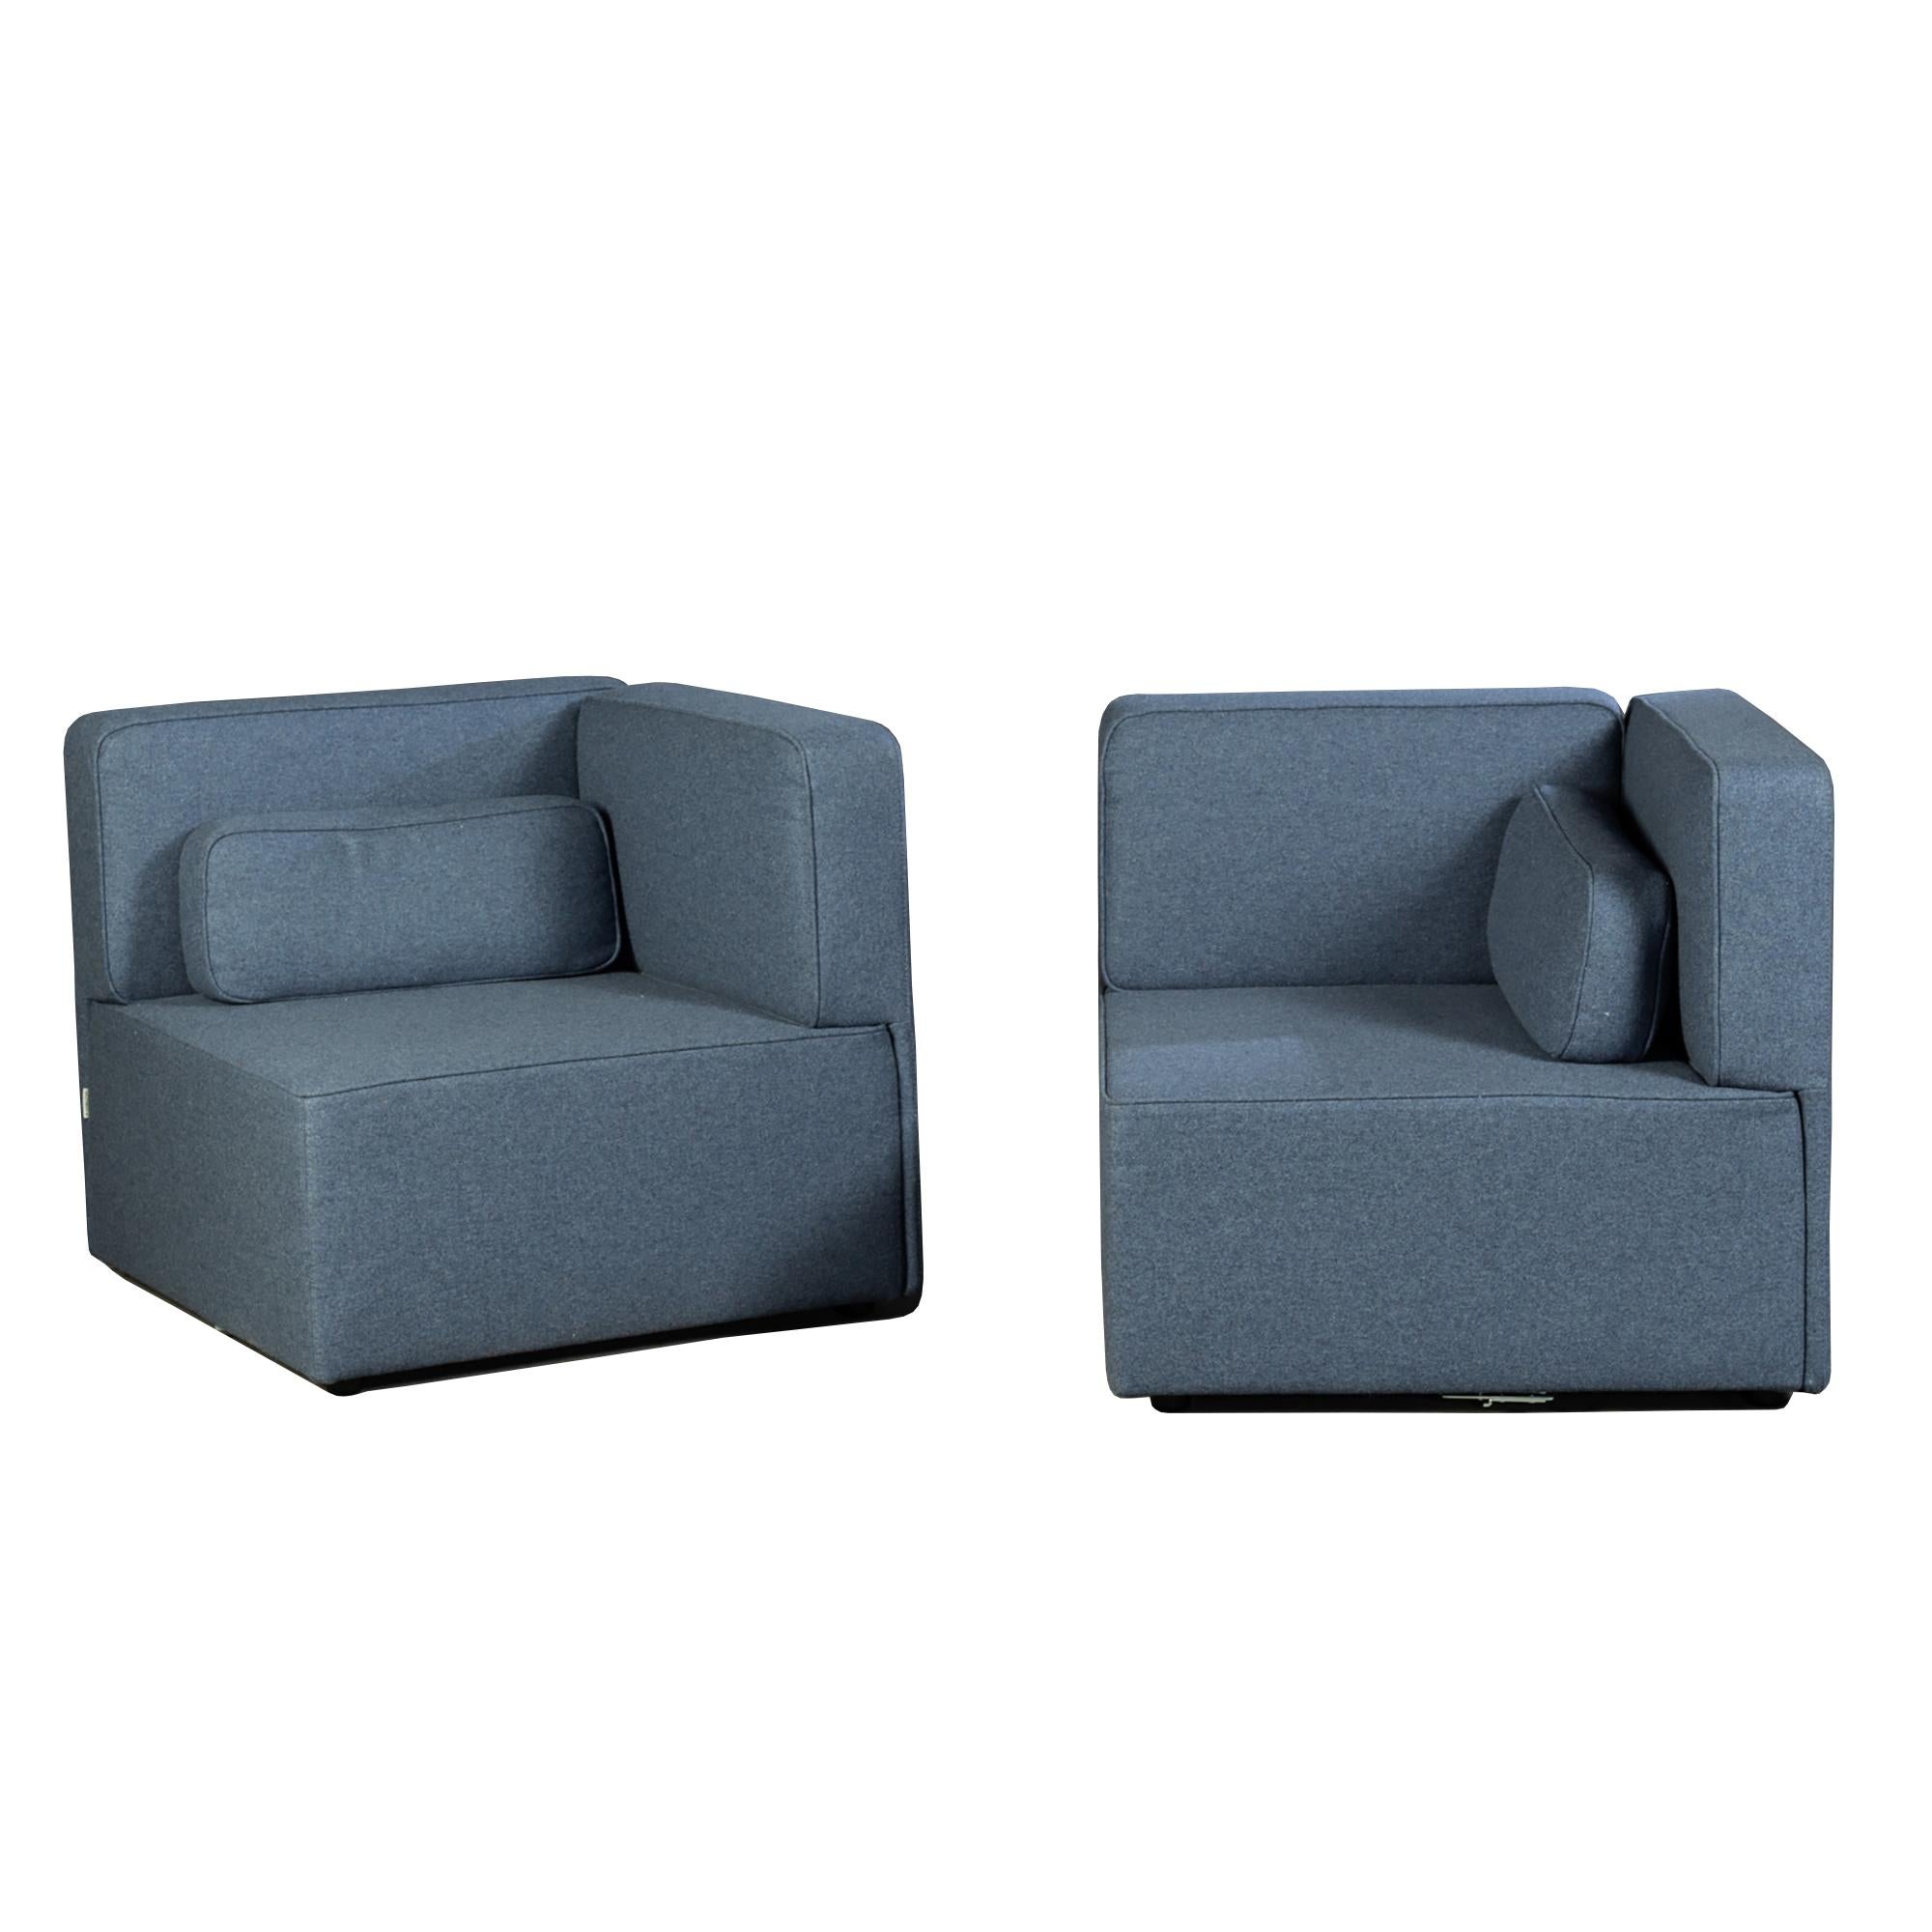 Sitzfeldt

SET

A blue wool upholstered modular sofa and ottoman.
With two square shaped corner-seats joining to create a rectangular sofa, with a conforming square ottoman.
Sitzfeldt, Germany, 2020.


Dimensions
Sofa
Height : 80 cm Width